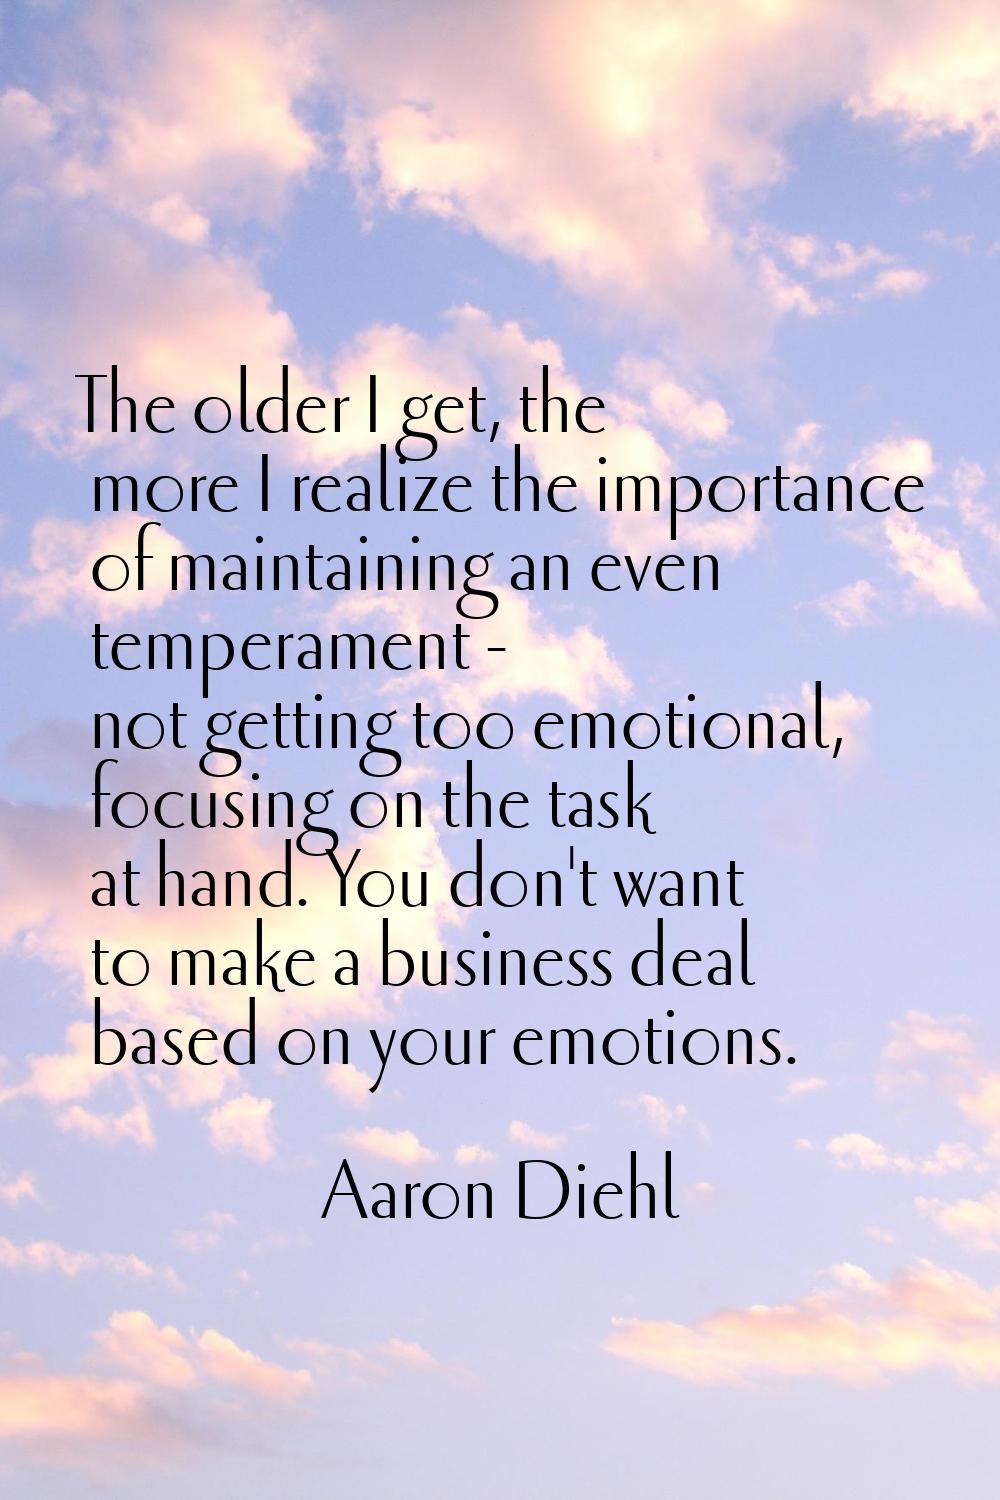 The older I get, the more I realize the importance of maintaining an even temperament - not getting